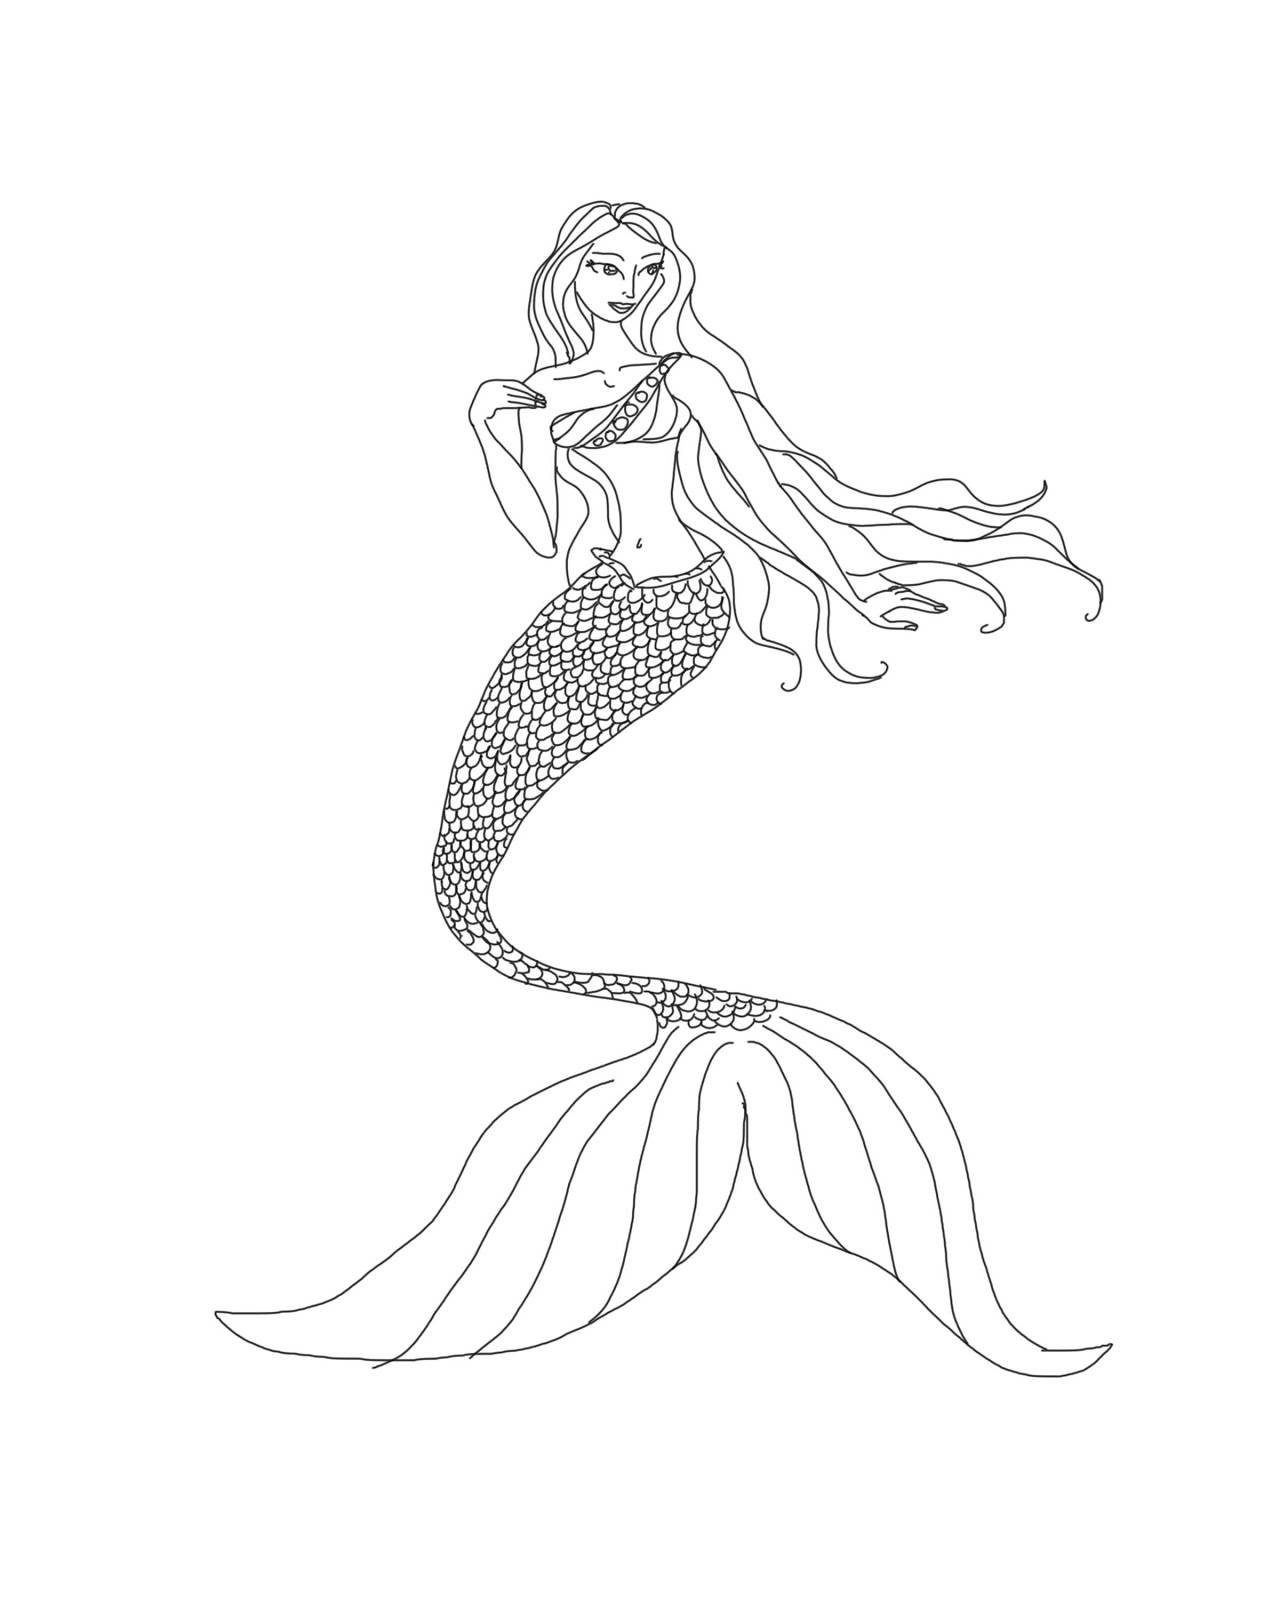 Mermaid Coloring Pages Download and Print Free - free mermaid coloring pages